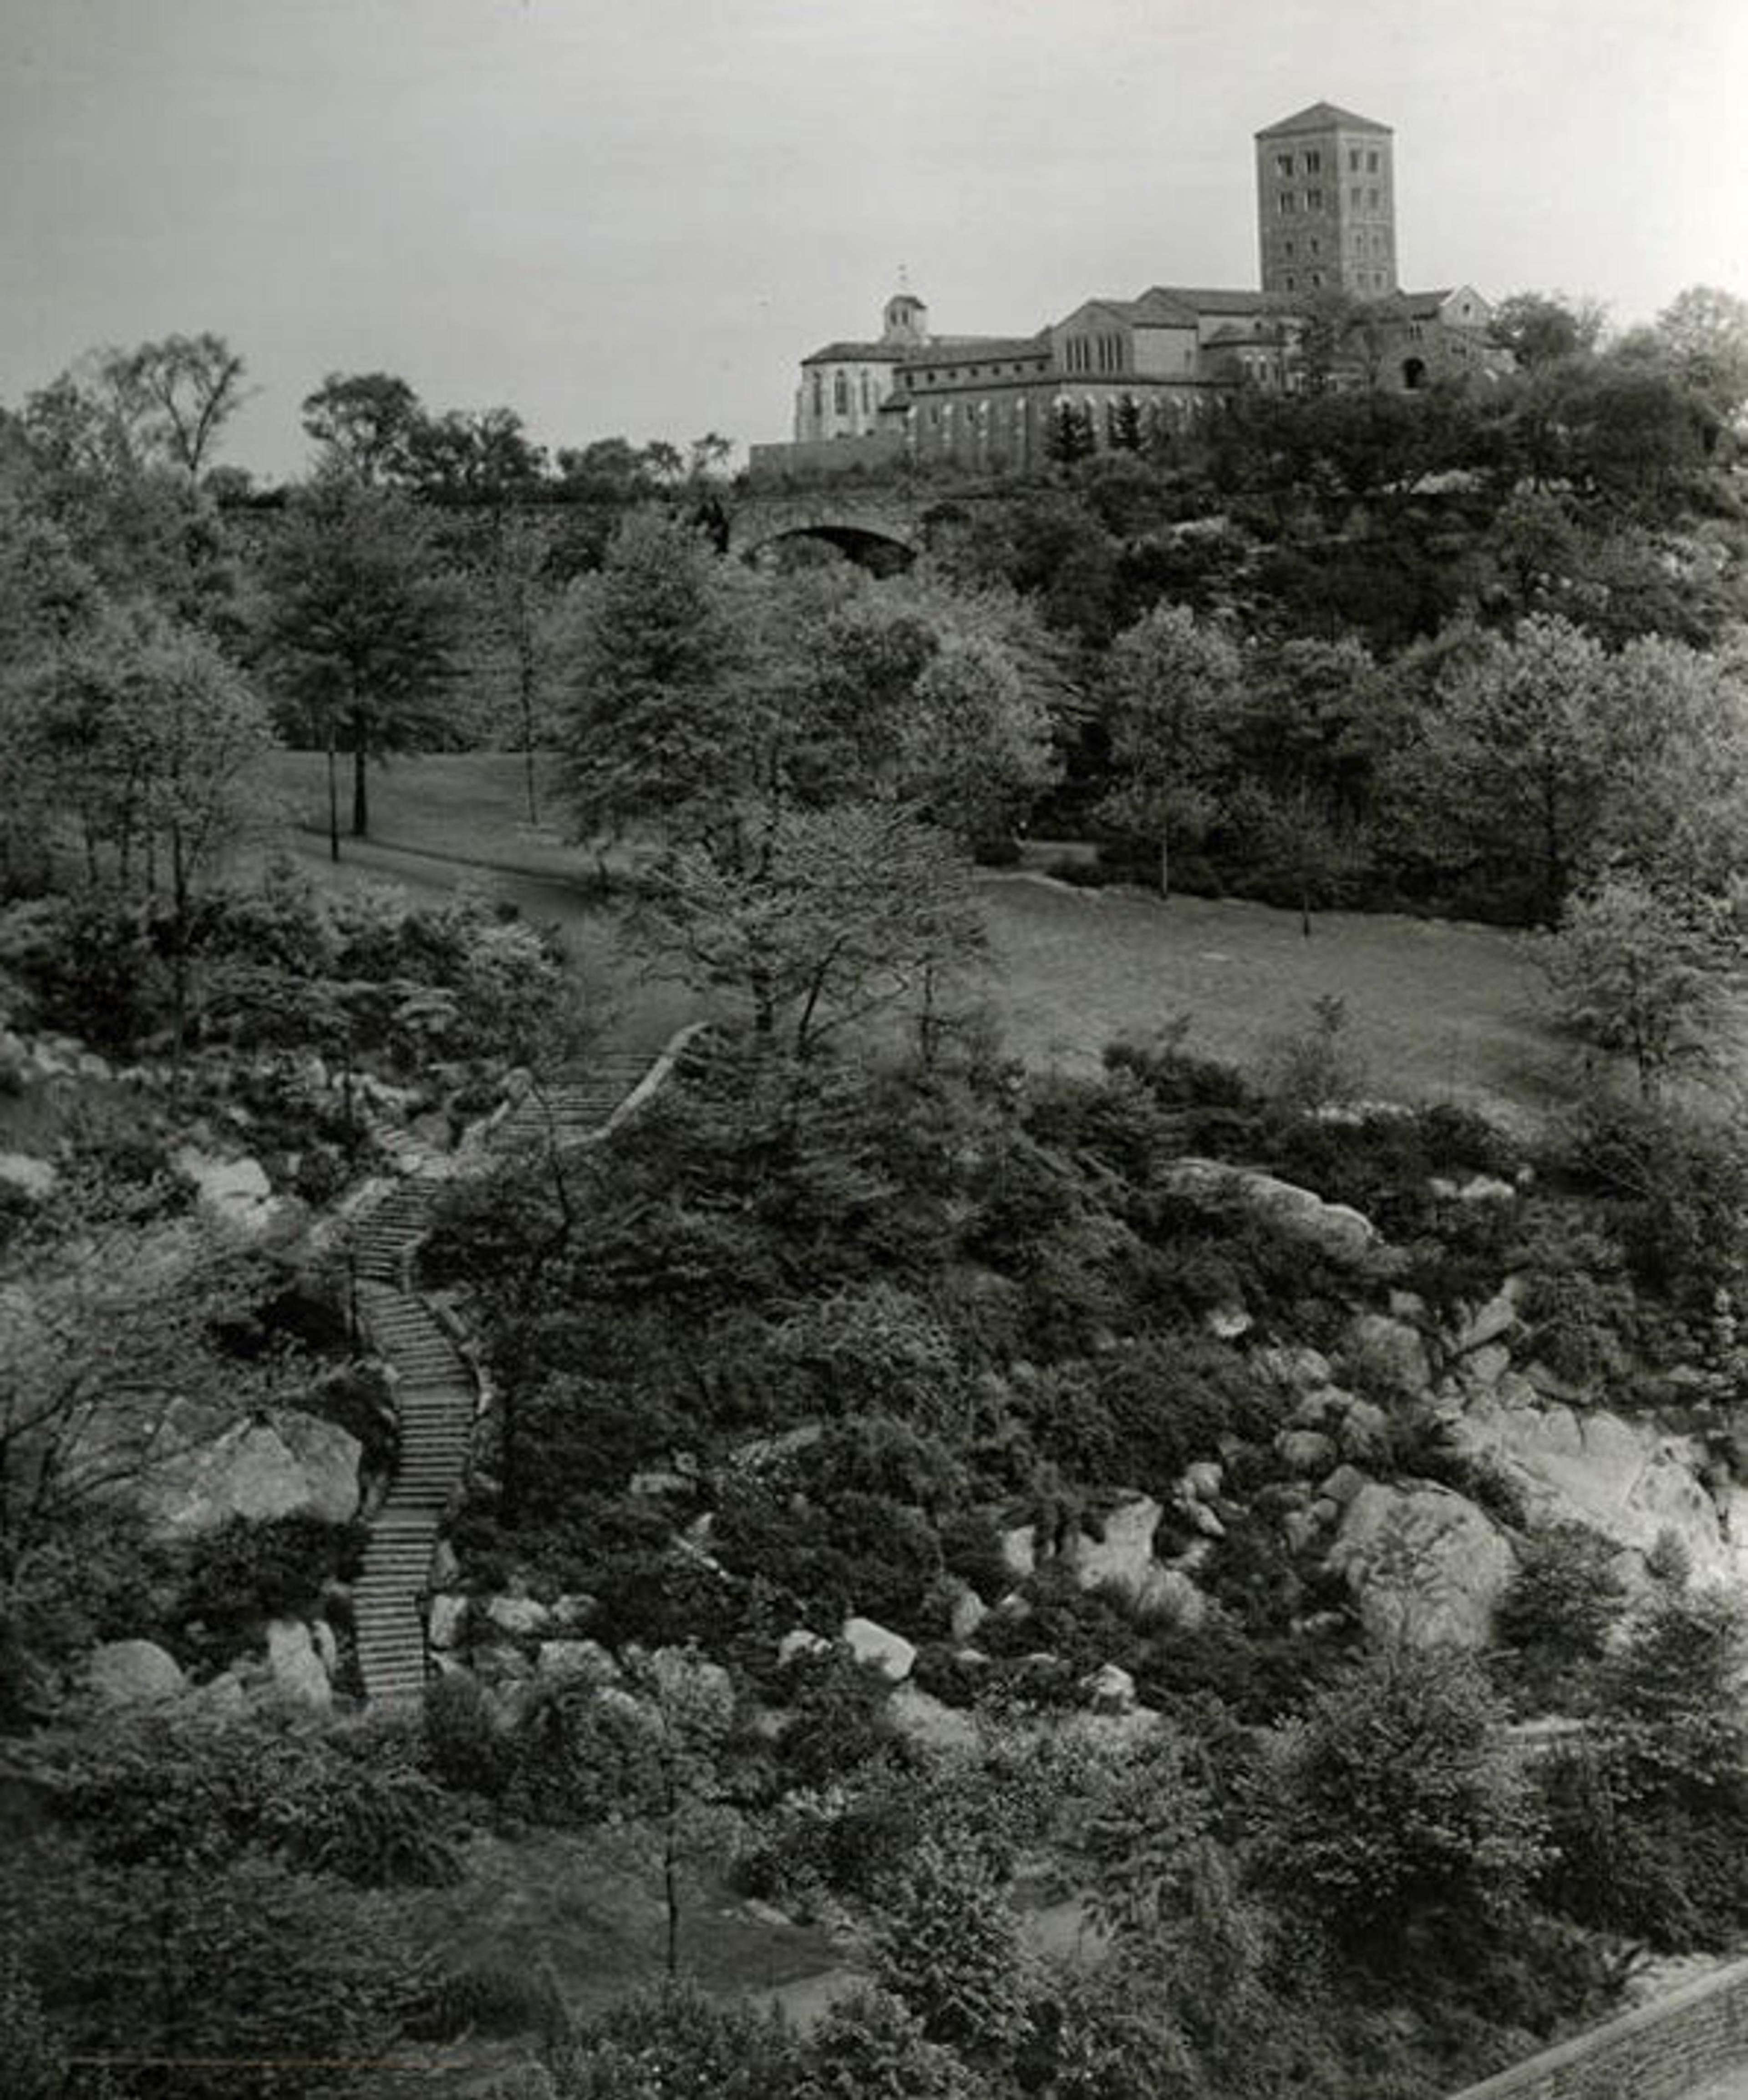 The Cloisters museum and gardens, 1938